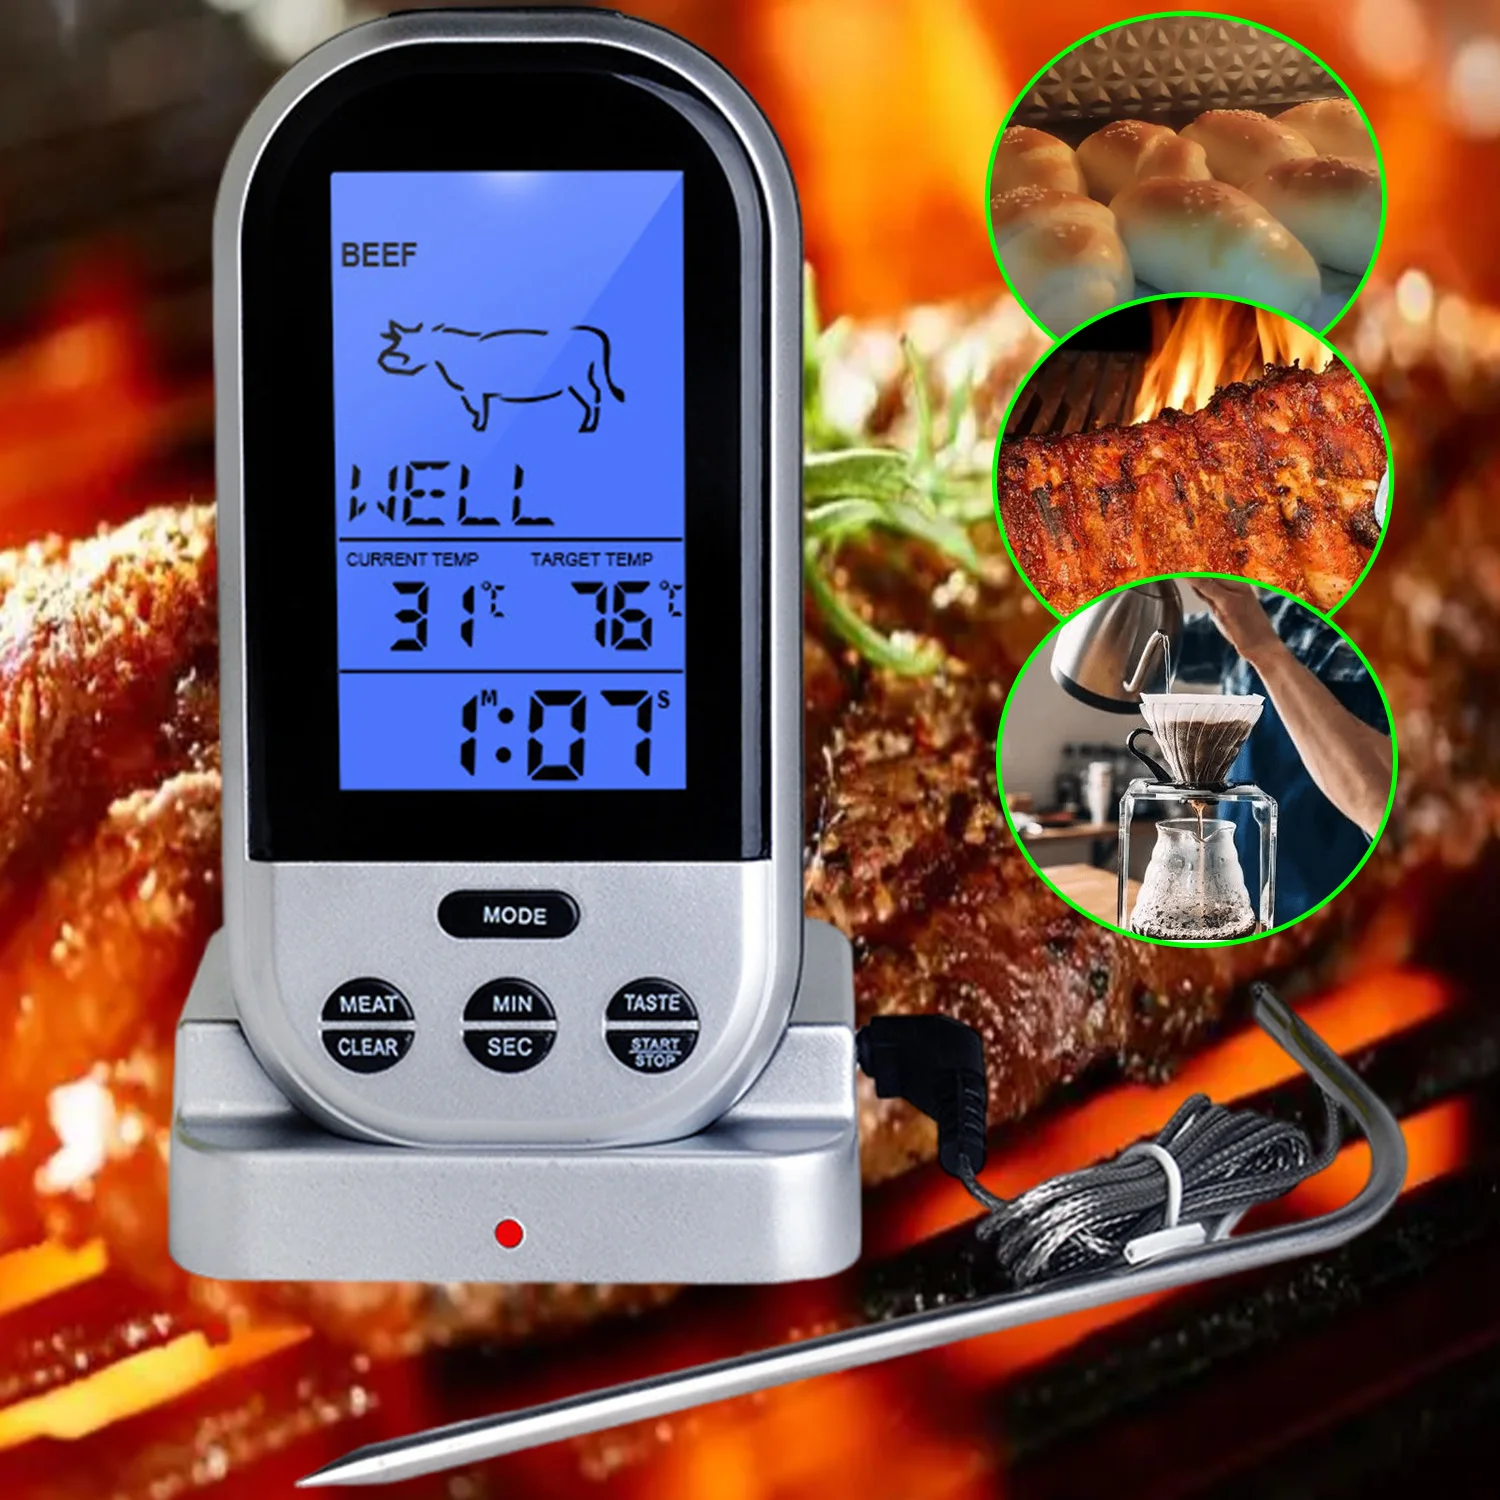 

Food Thermometer,Digital Probe Temperature,Alarm Instant Read Thermometer for Kitchen Cooking Milk Coffee Barbecue Toast